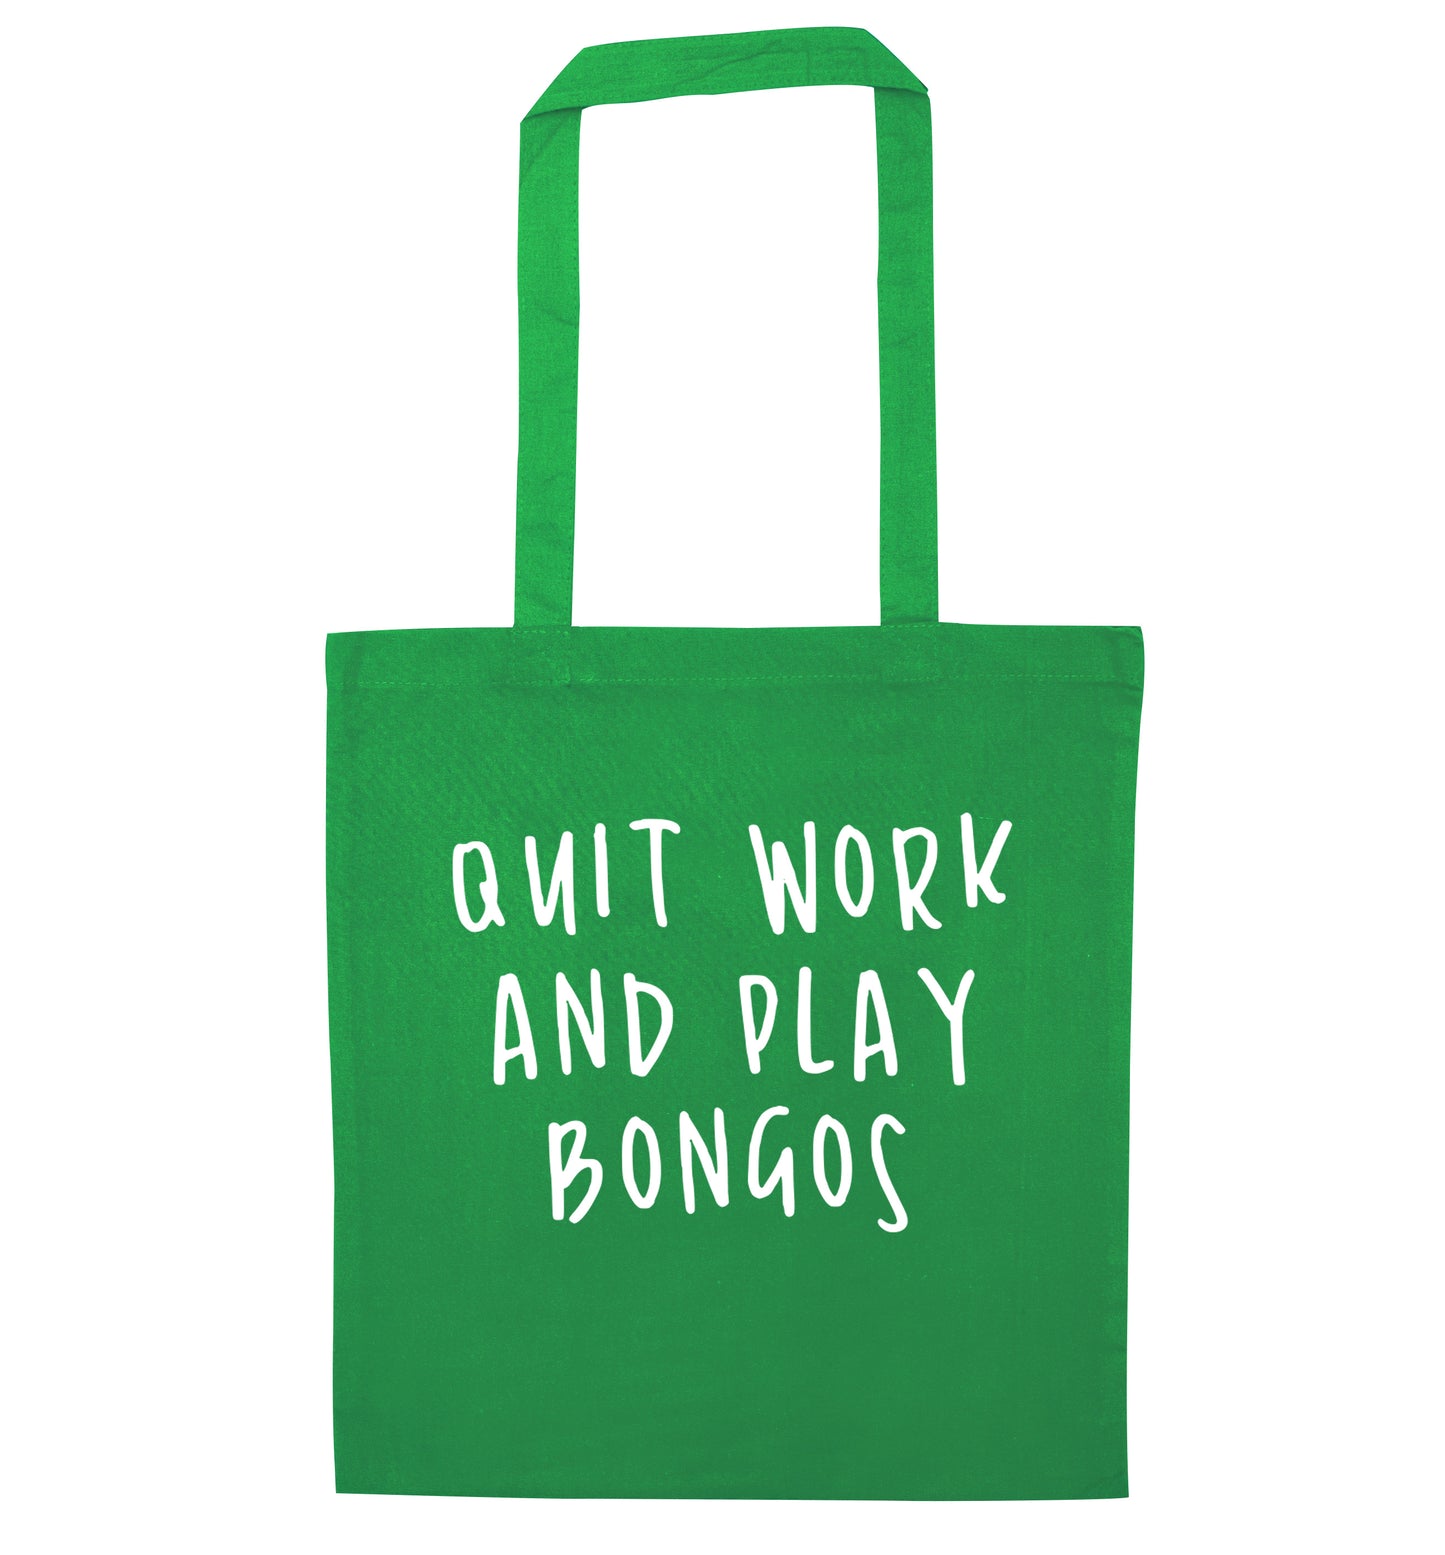 Quit work and play bongos green tote bag